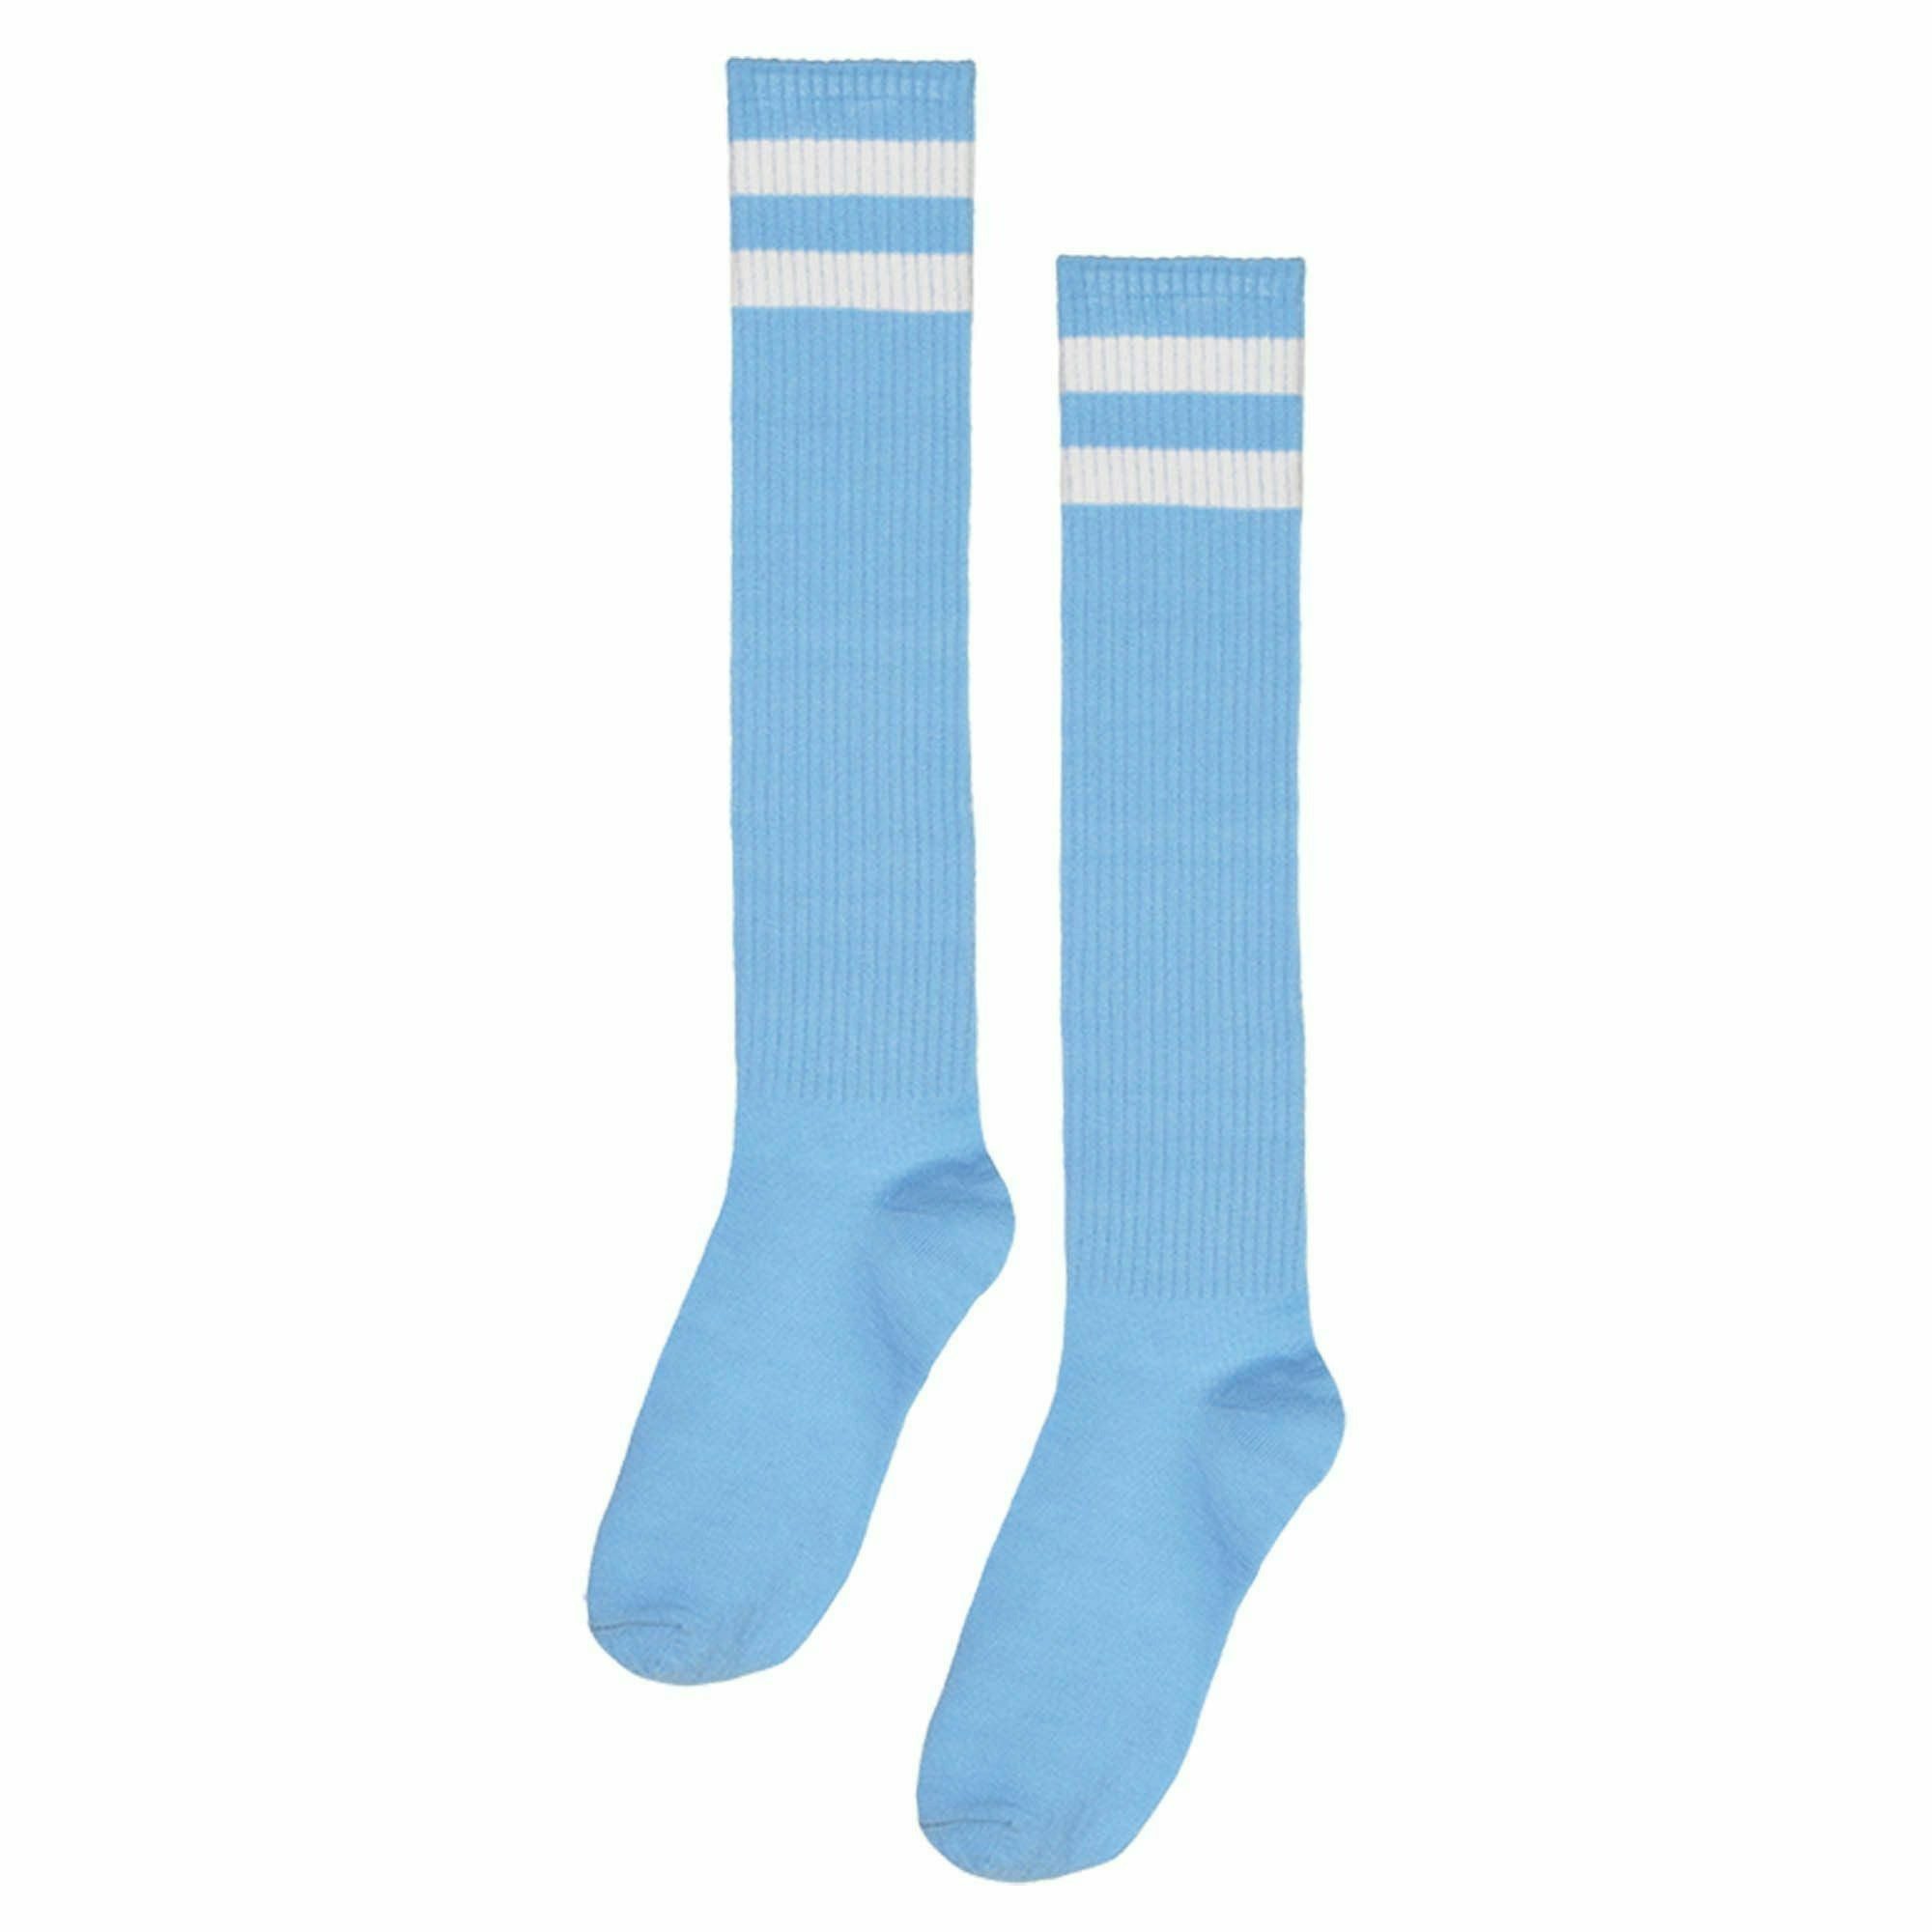 Amscan COSTUMES: ACCESSORIES Light Blue Striped Knee Socks